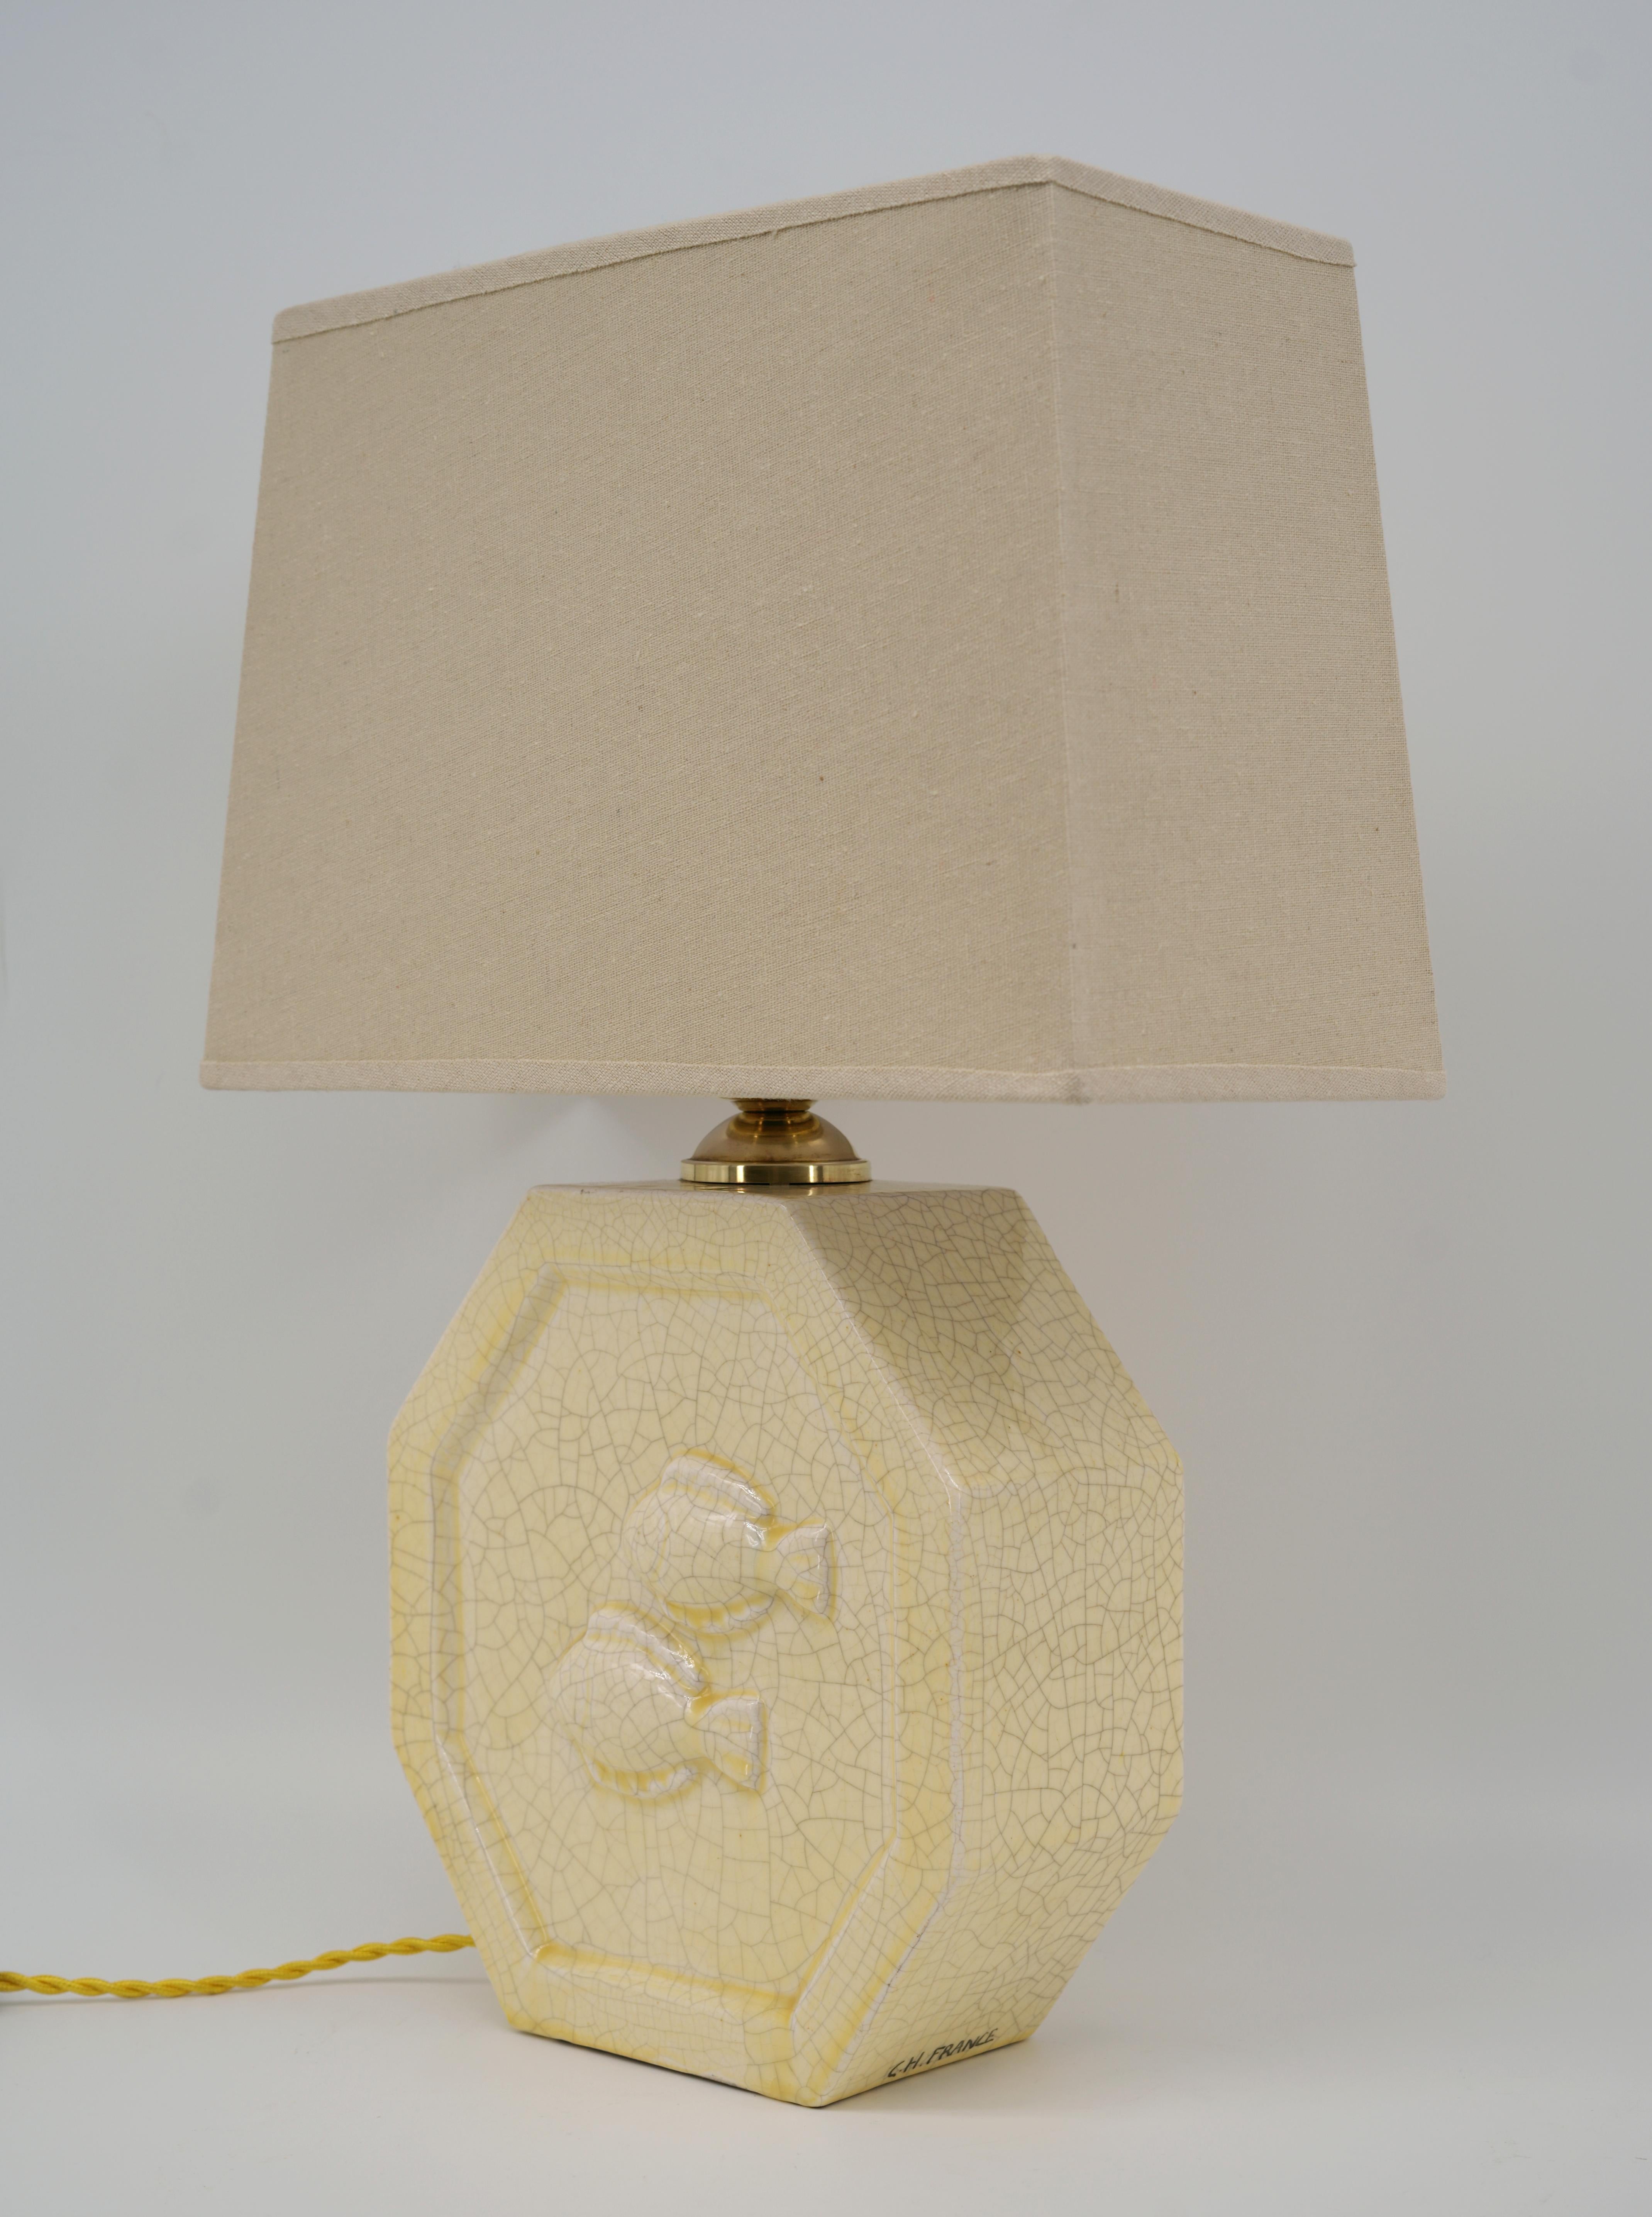 Mid-20th Century Charles HARVA French Art Deco Crackle Glaze Ceramic Lamp, 1930s For Sale